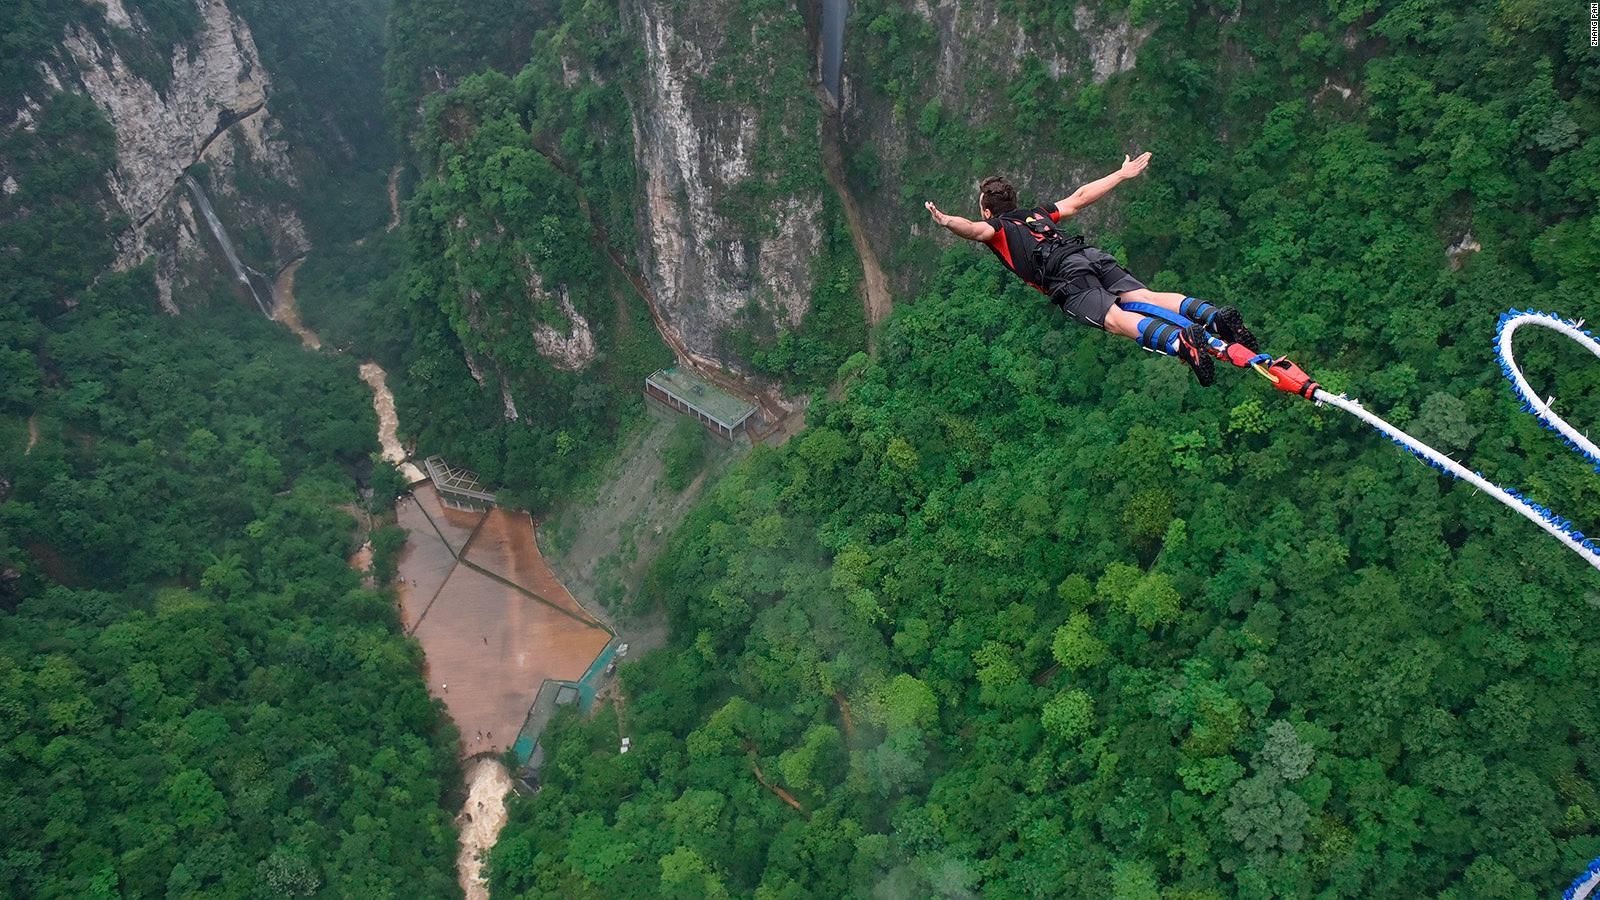 Bungee Jumping Off World's Highest Glass Bridge In China (photos)